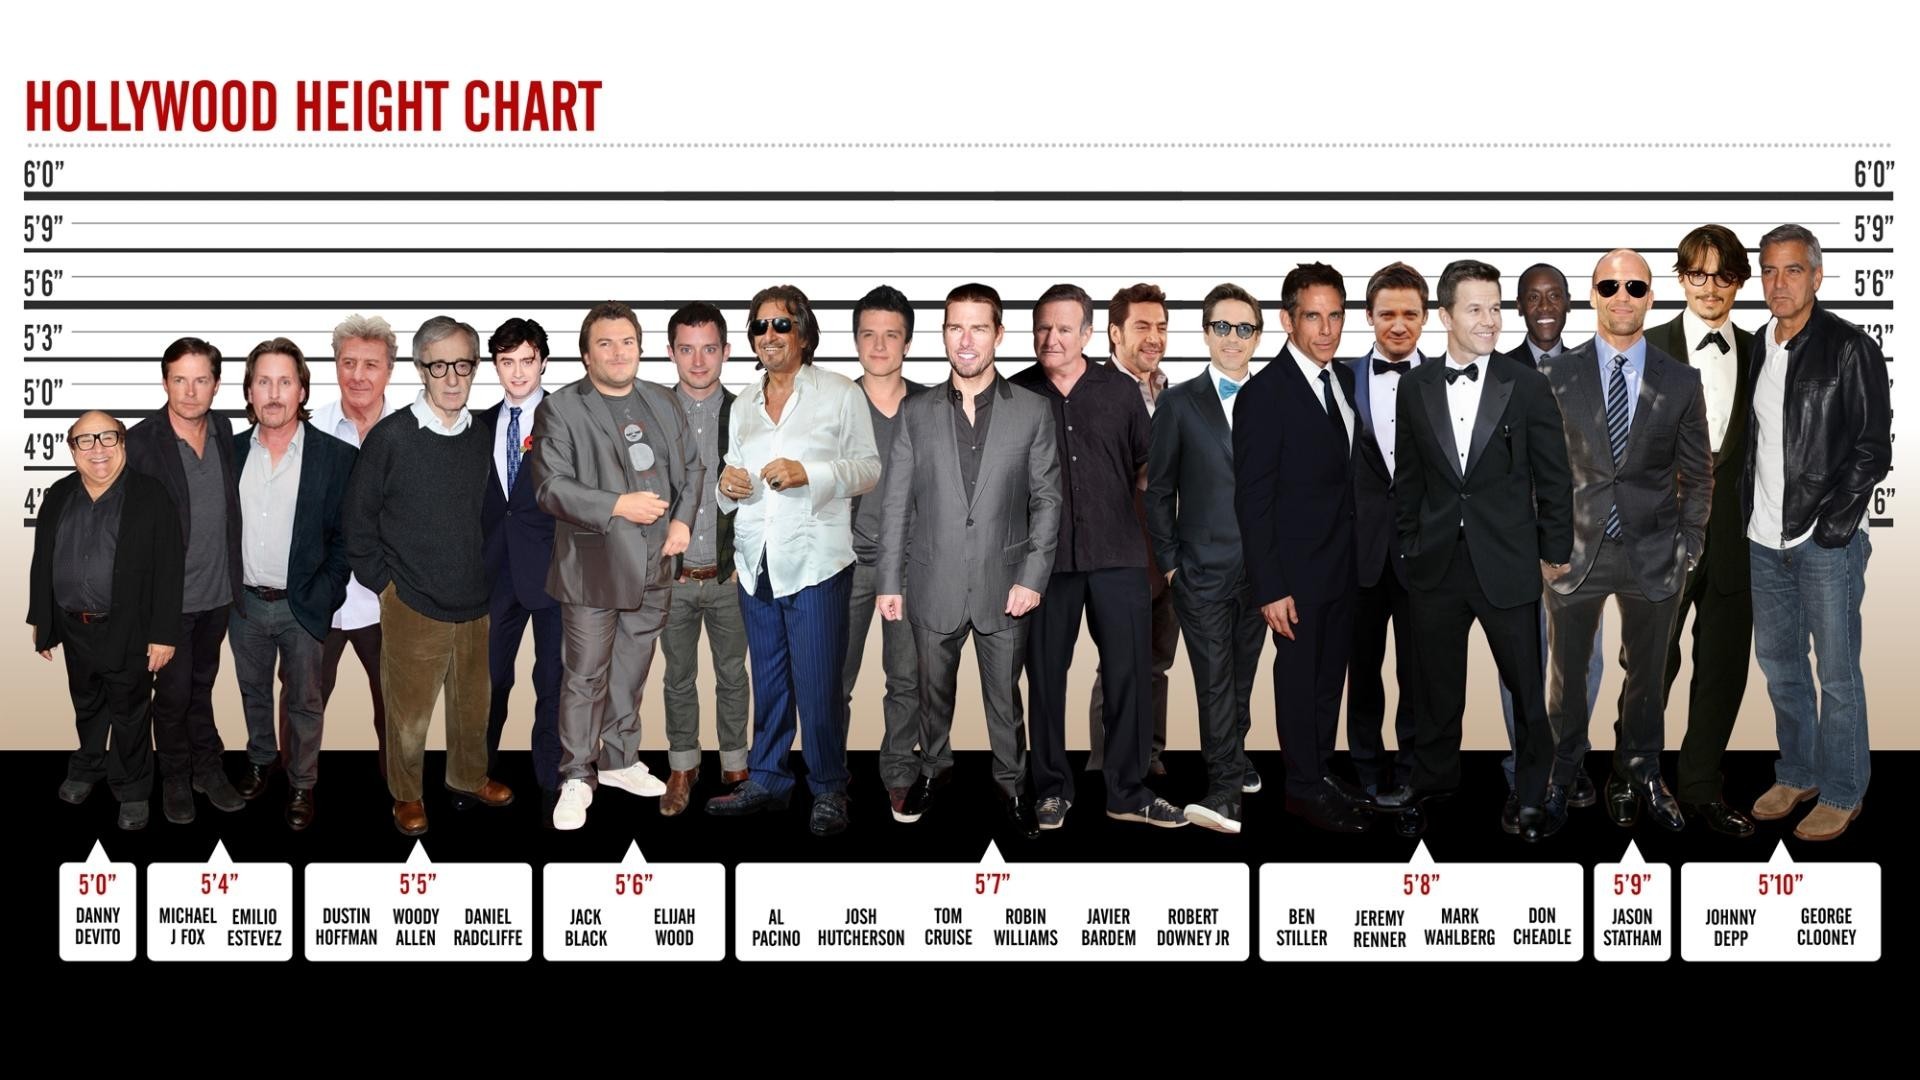 Hollywood Height Chart Wallpaper